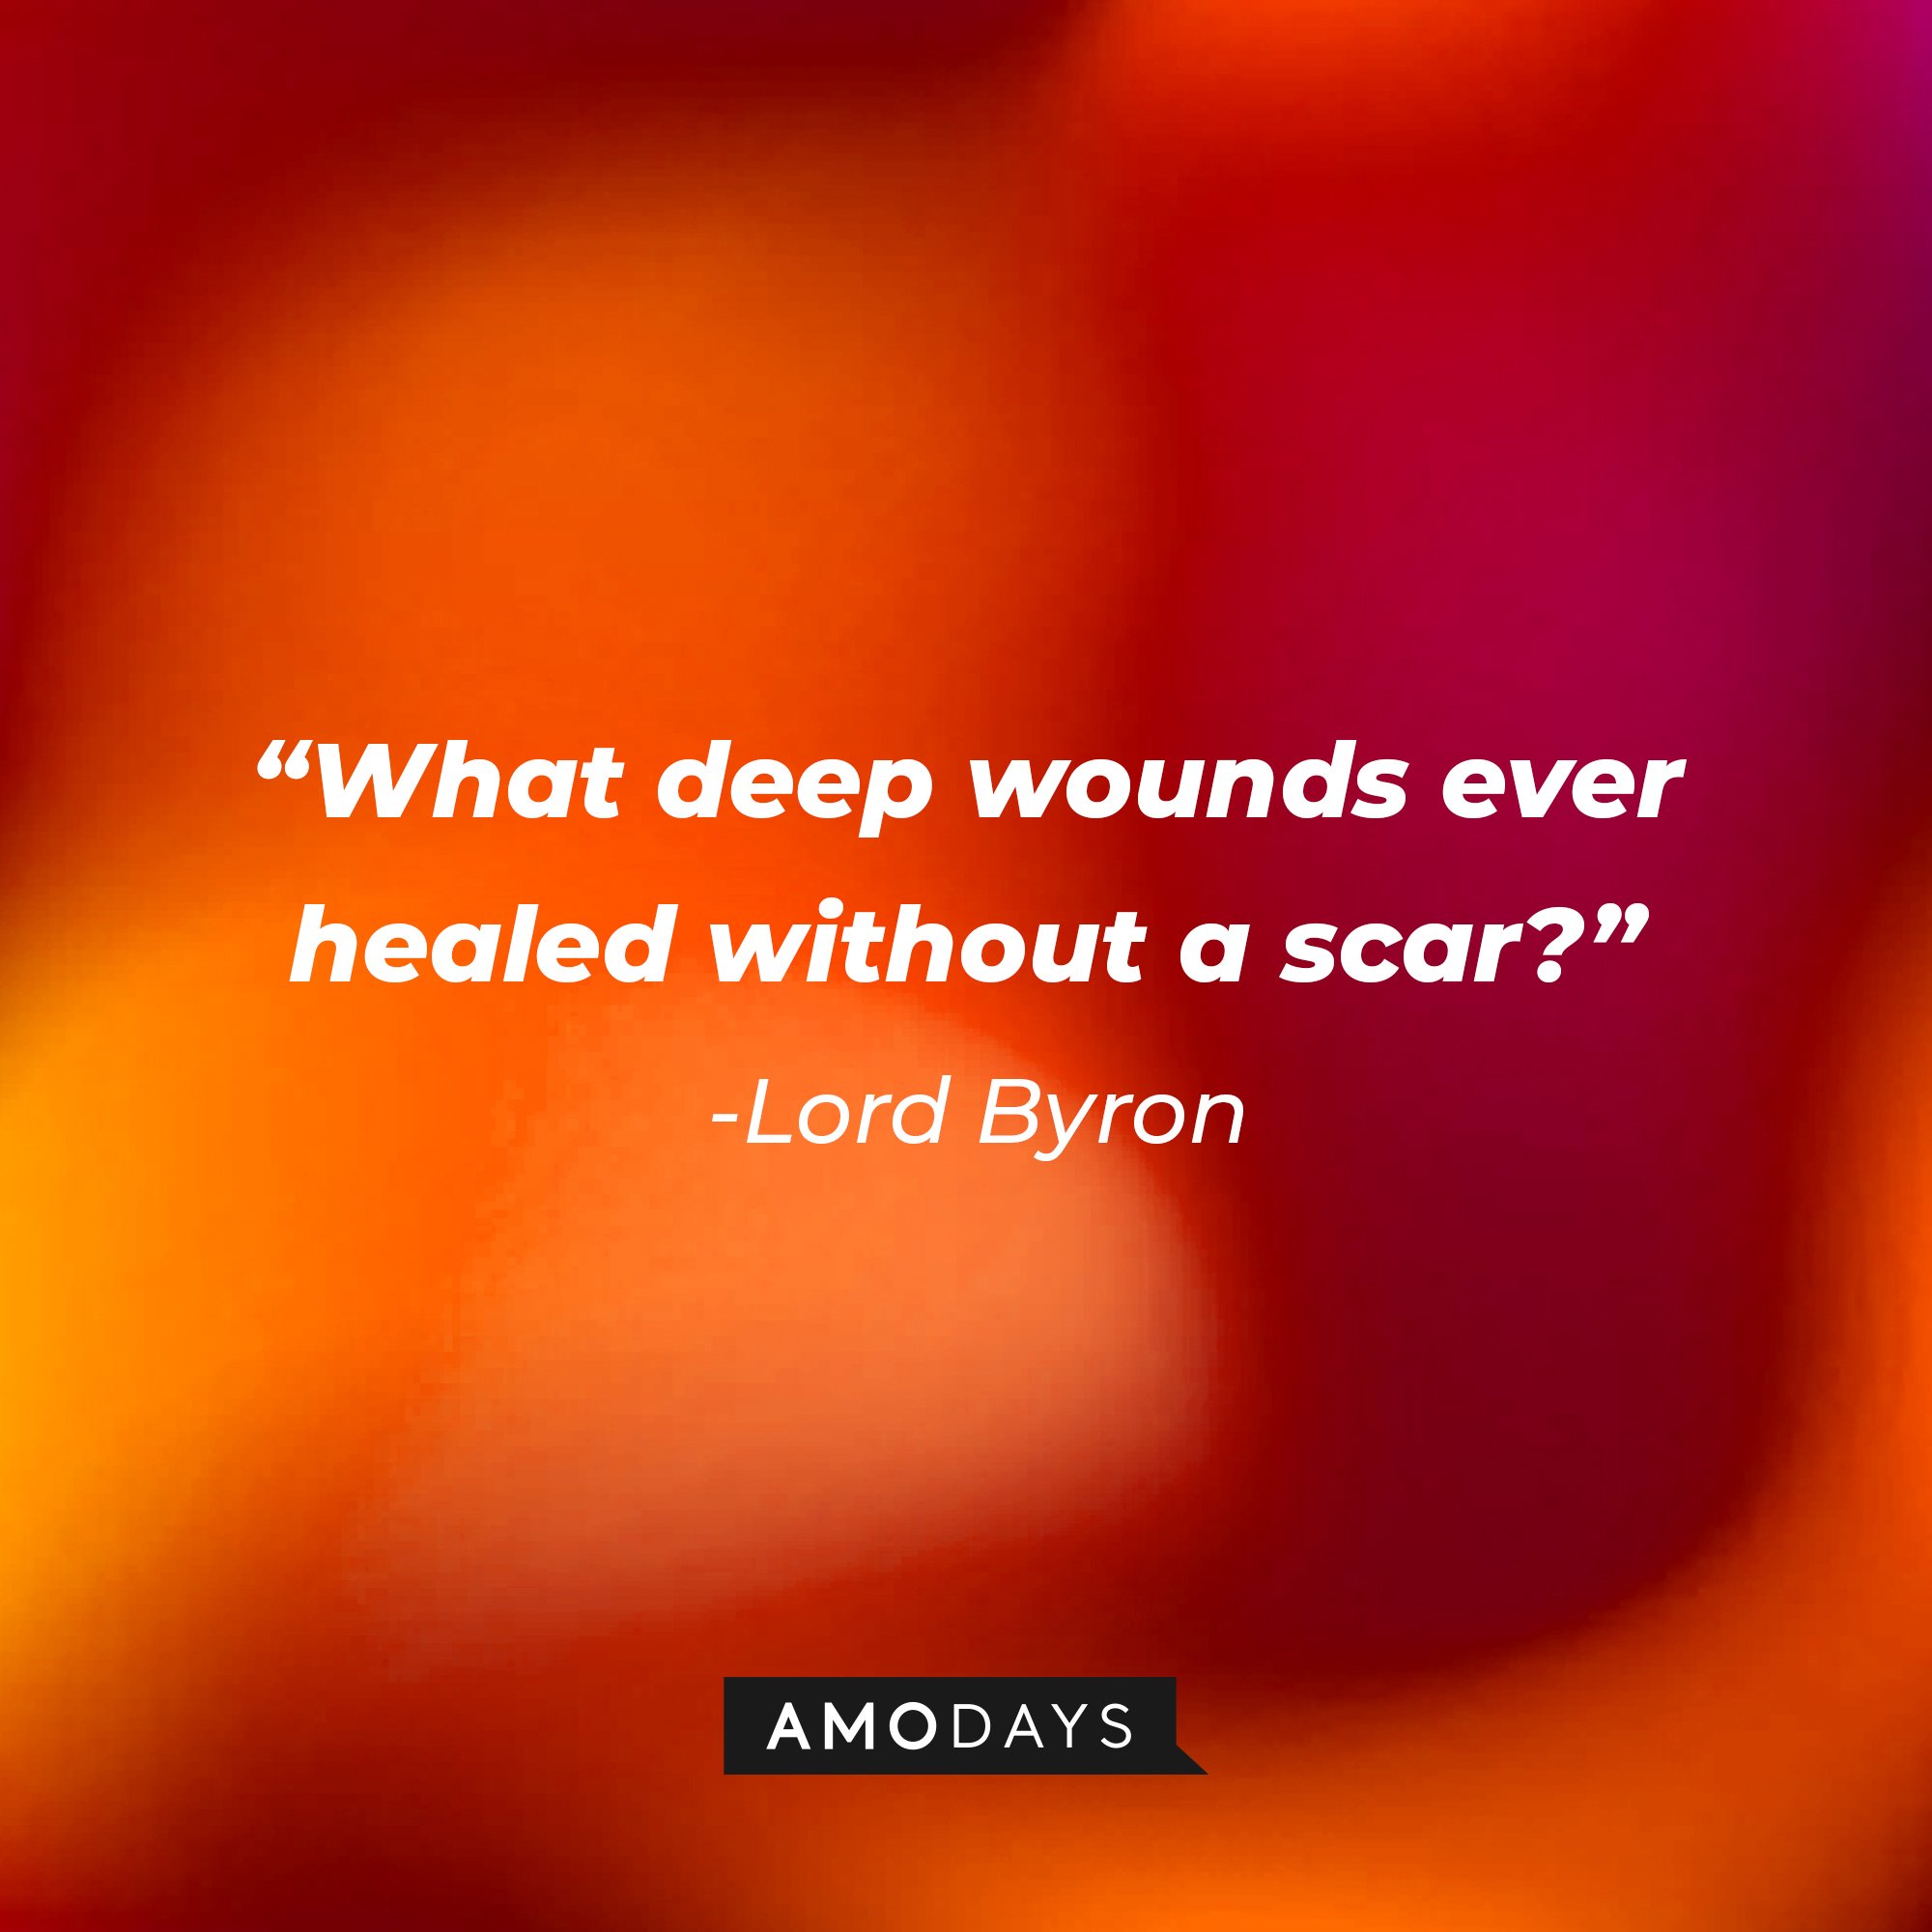 Lord Byron‘s quote: "What deep wounds ever healed without a scar?" | Image: AmoDays